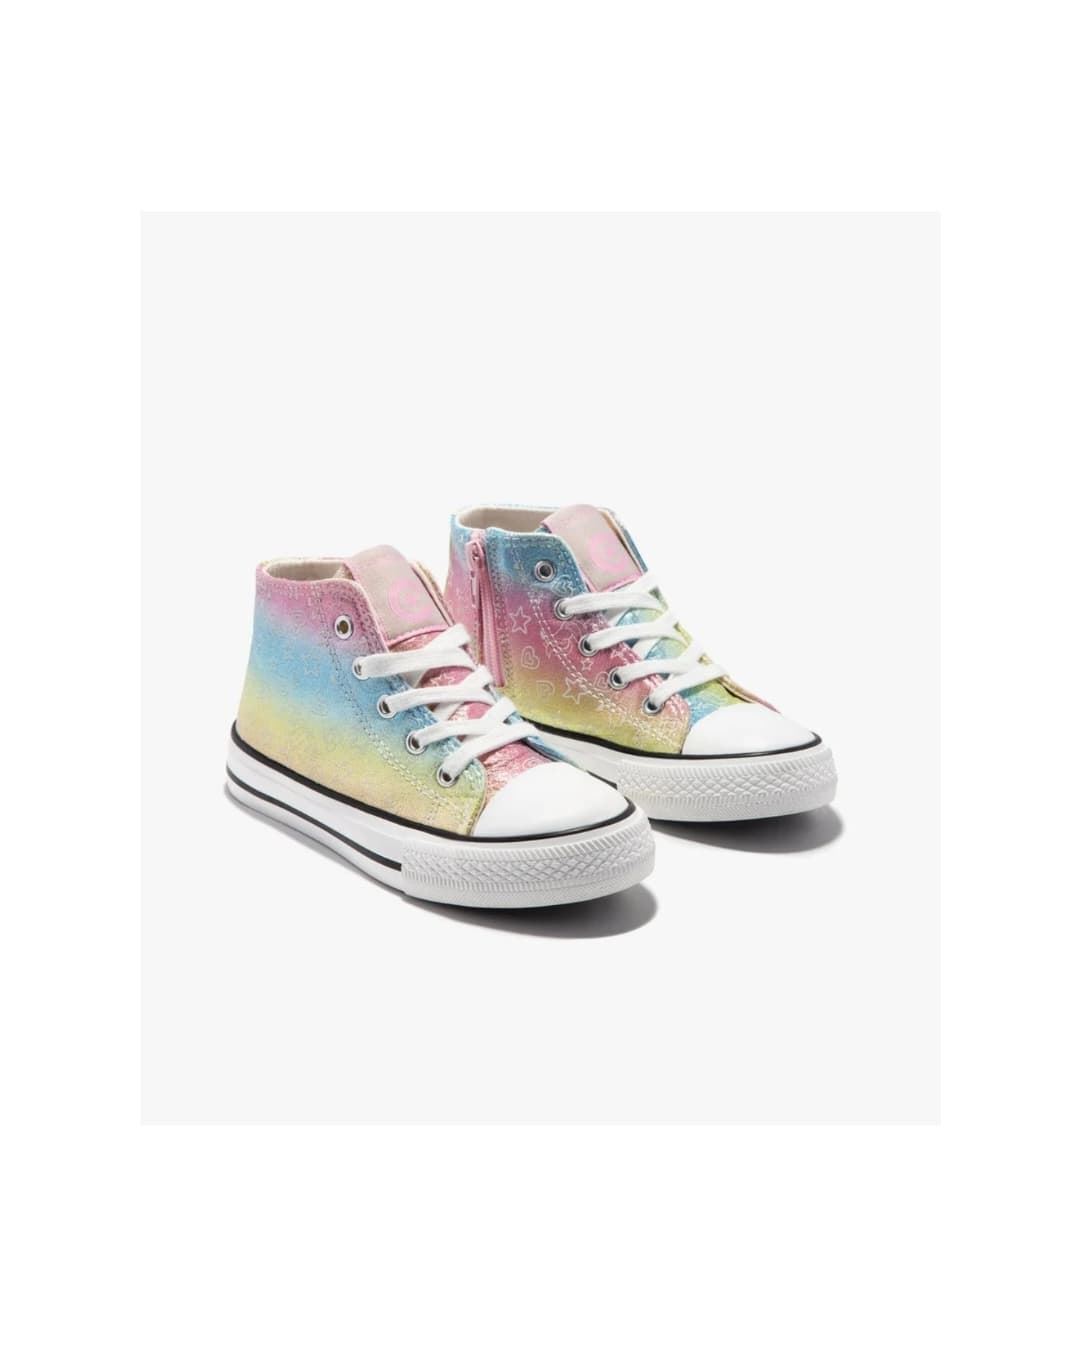 Conguitos Unicorn High Top Sneakers Glow in the Dark - Image 4